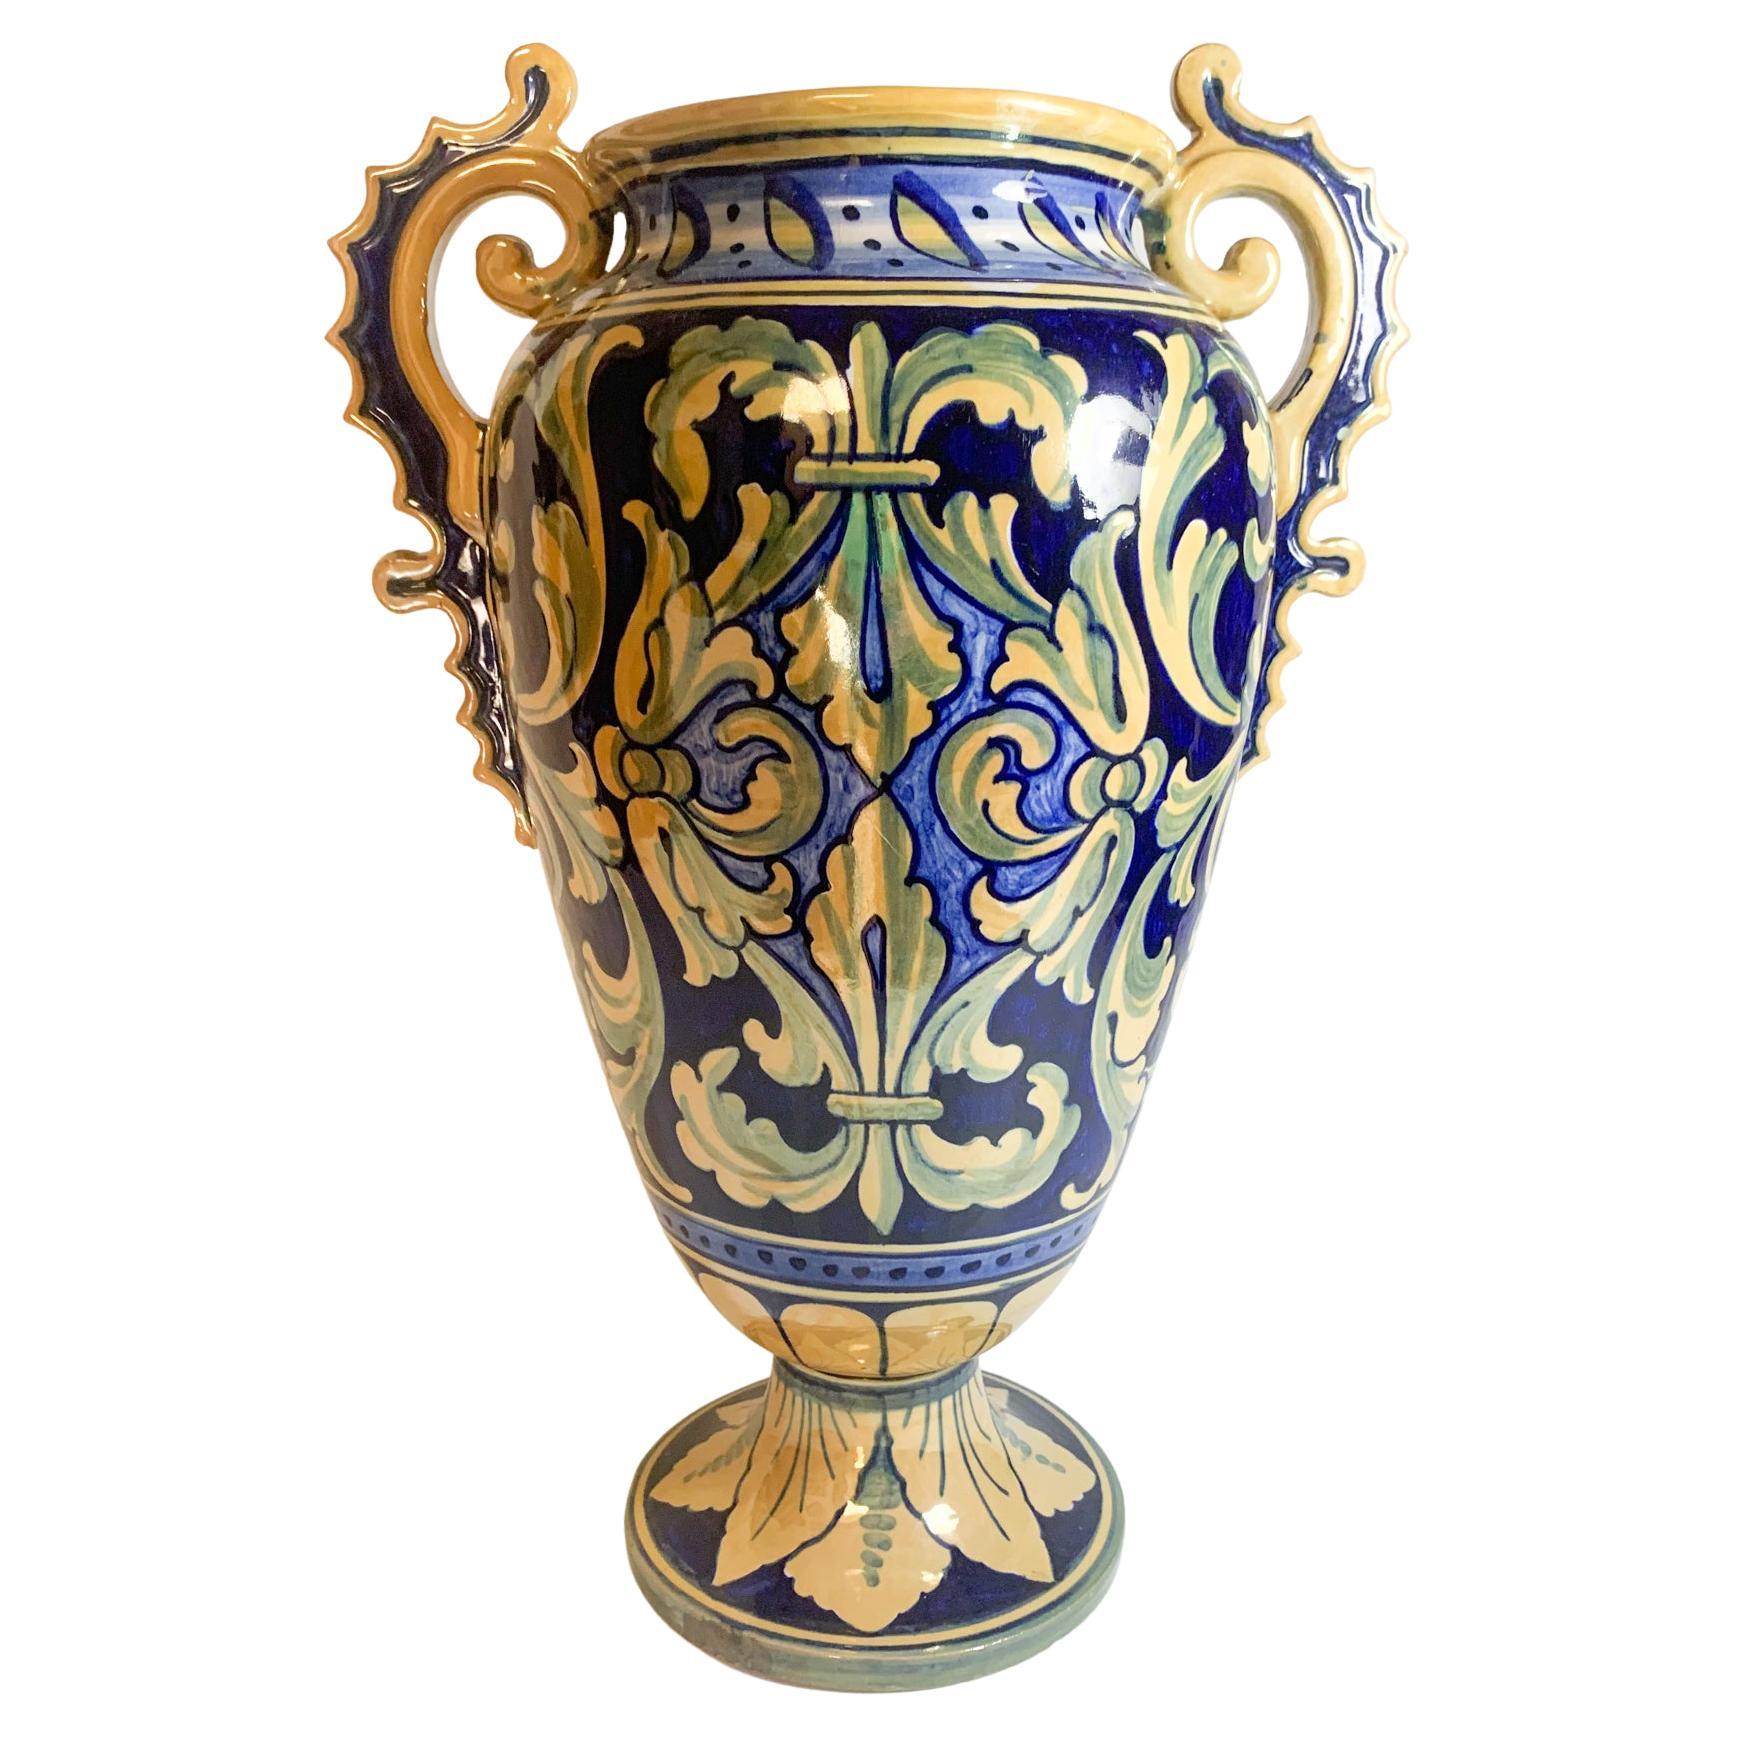 Italian Hand Painted Iridescent Ceramic Vase by Gualdo Tadino from the 1950s For Sale